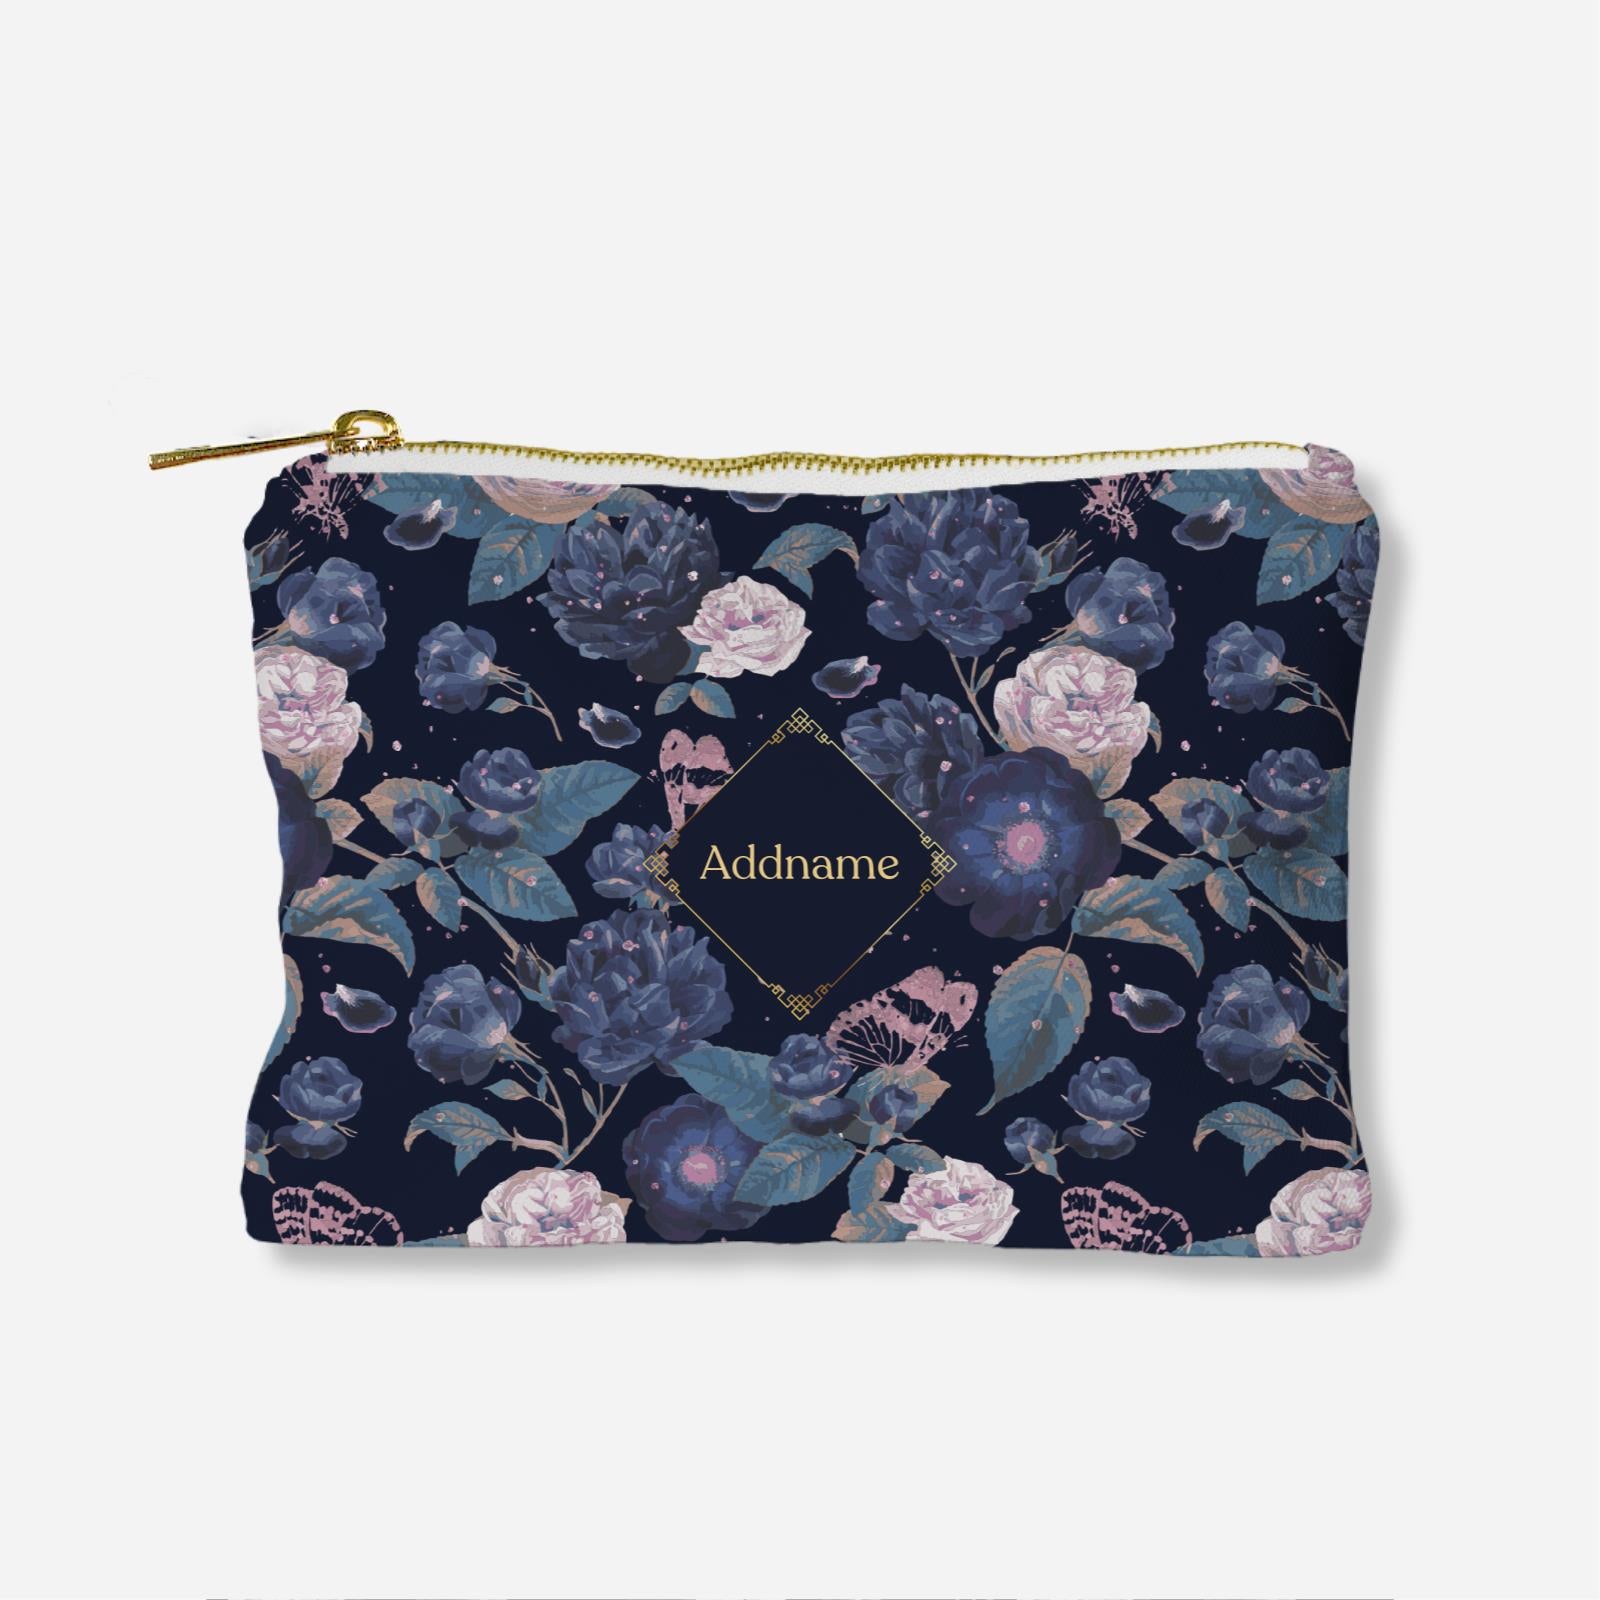 Royal Floral - Blue Full Print Zipper Pouch With English Personalization